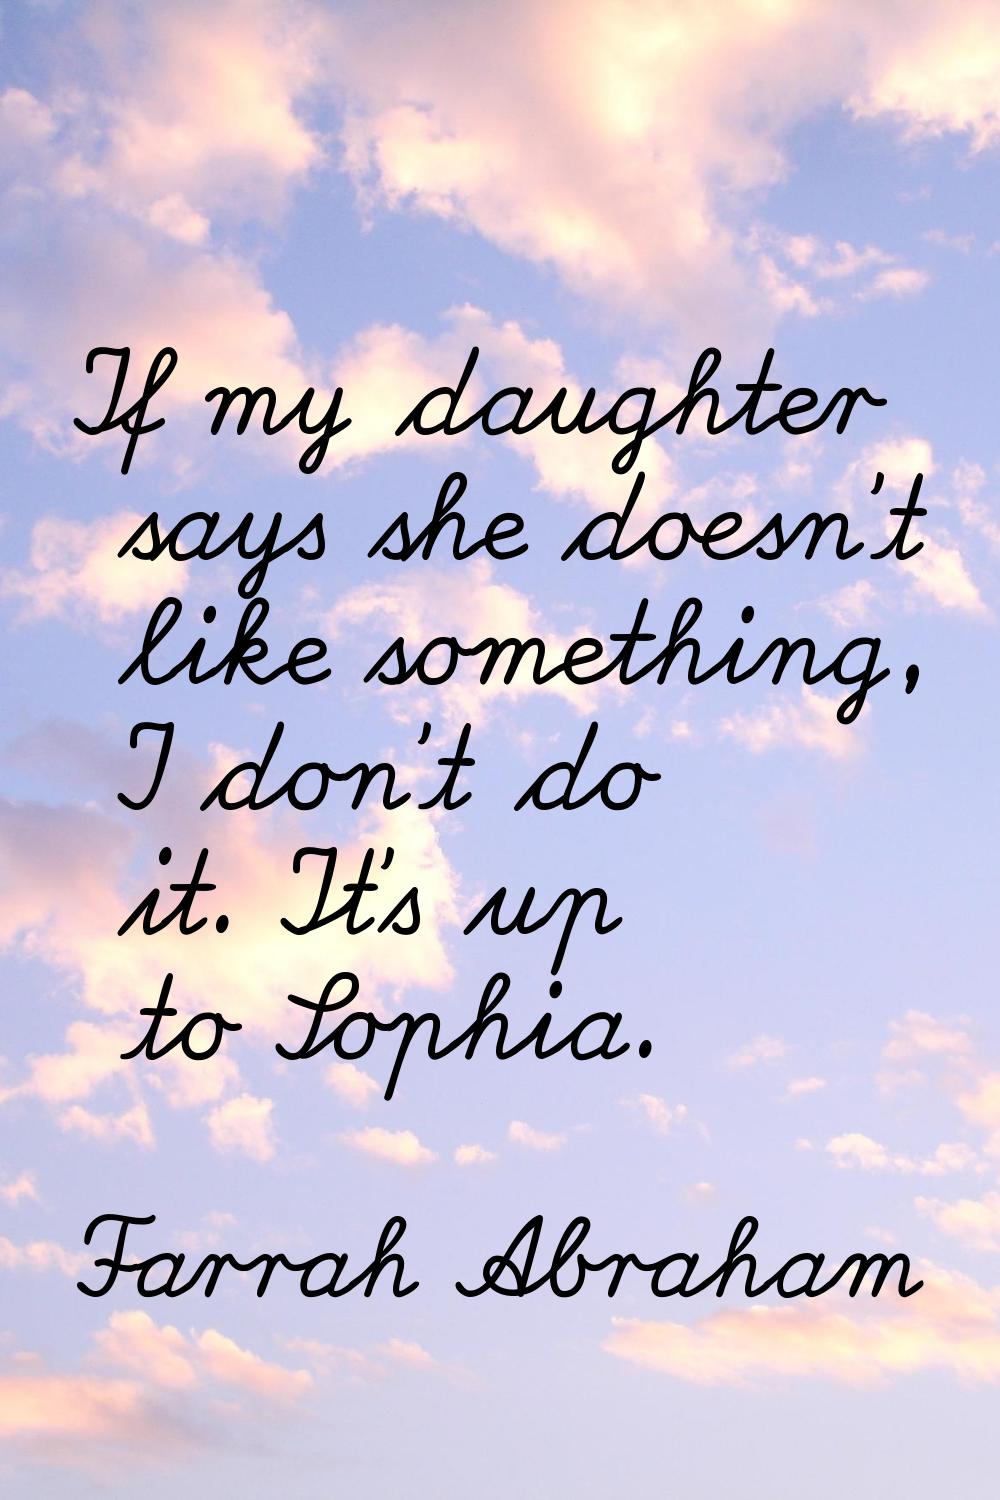 If my daughter says she doesn't like something, I don't do it. It's up to Sophia.